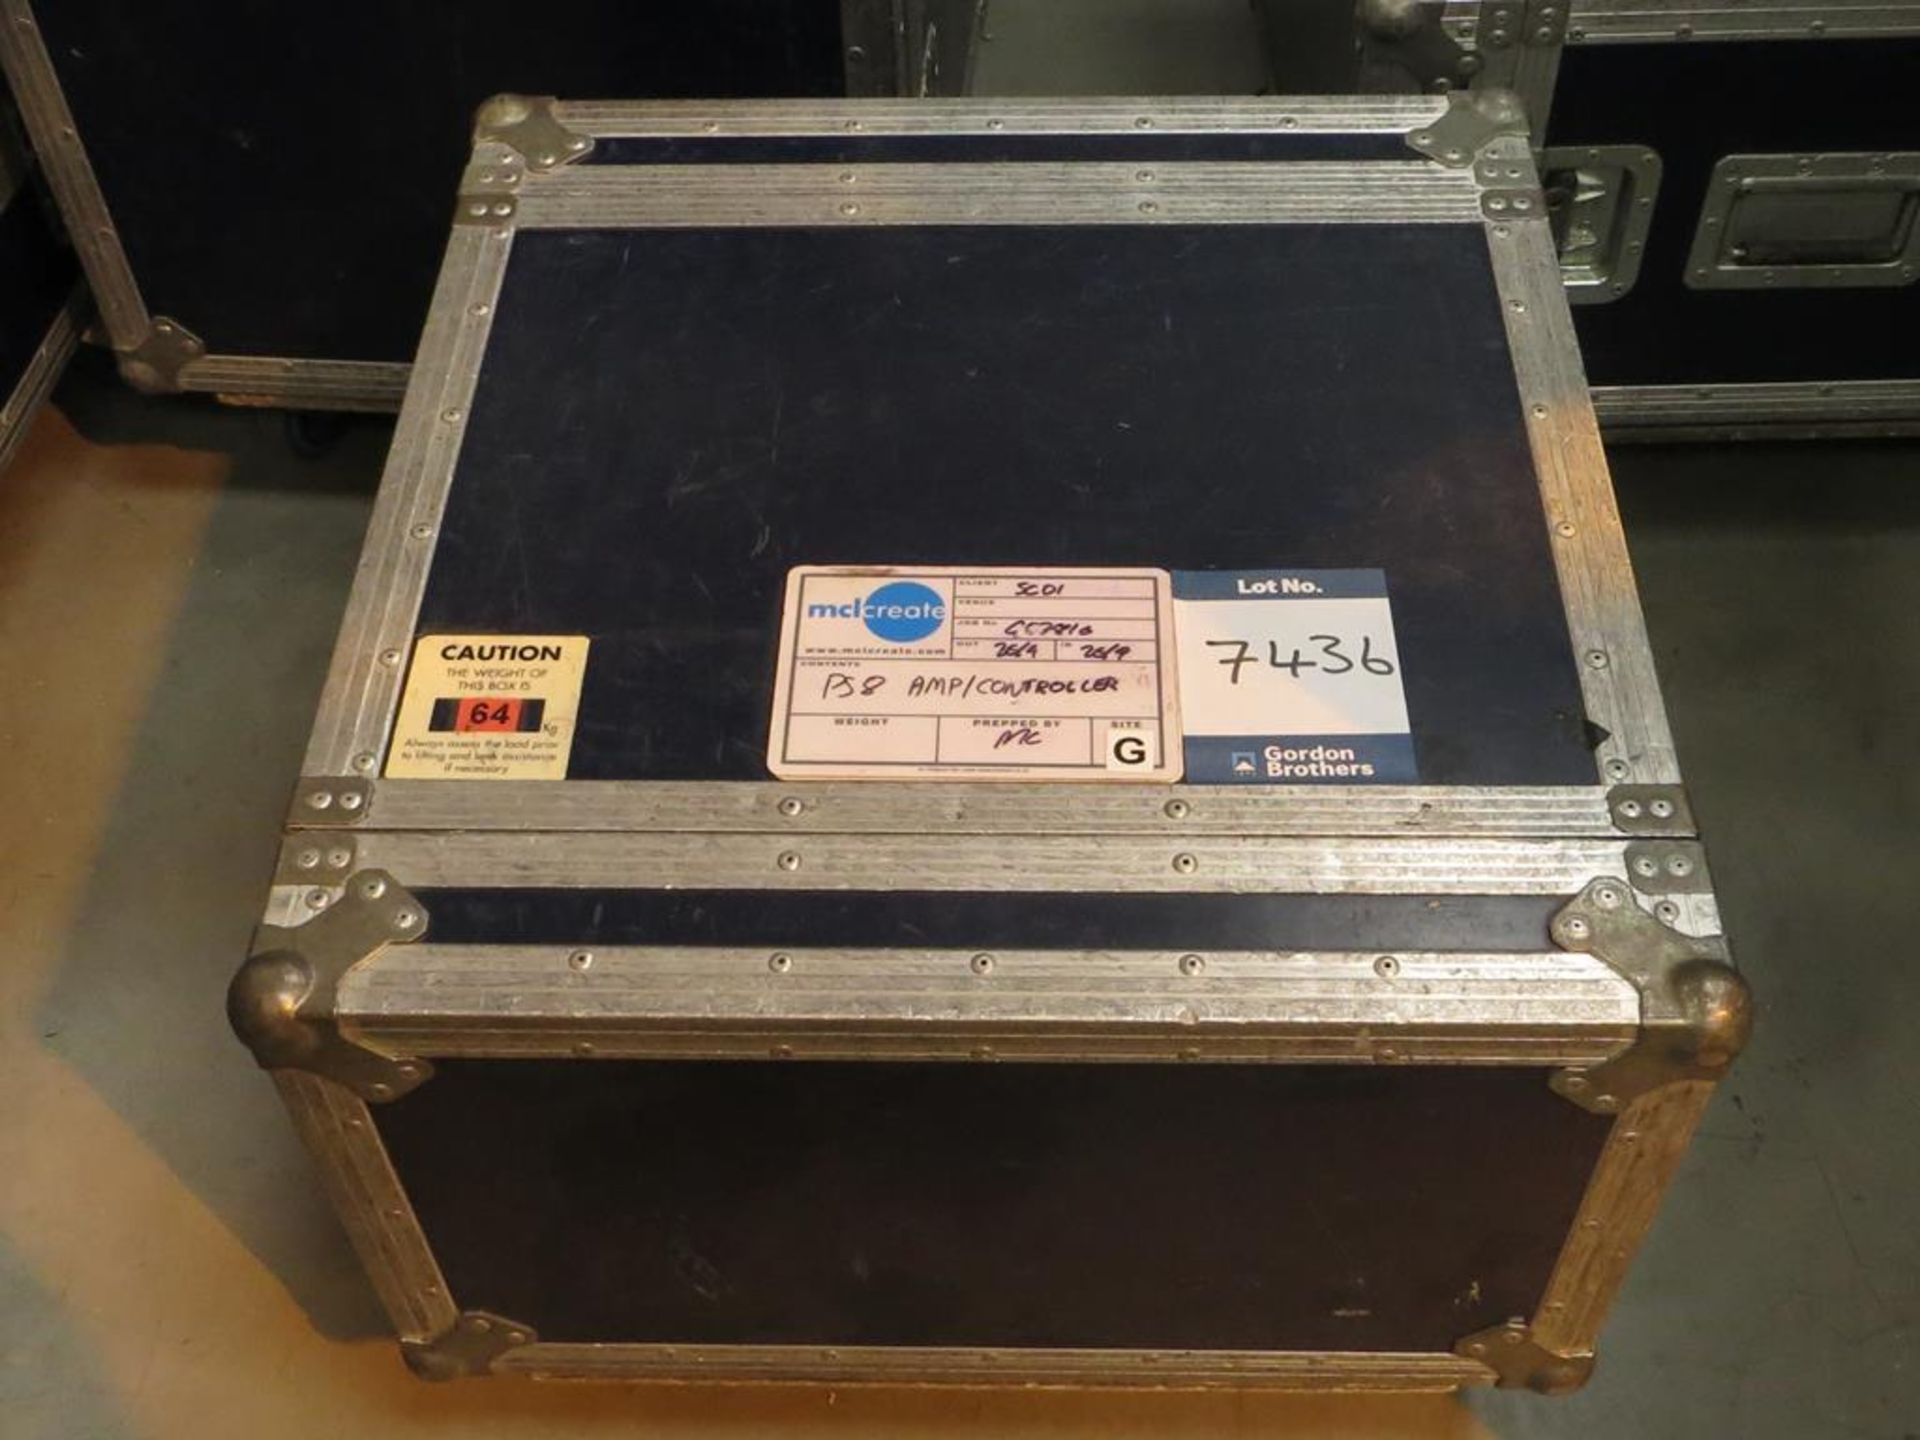 Crown Macrotech, 1201 power amplifier and Nexo, PS15100 eight speaker controller in transit case: - Image 3 of 3